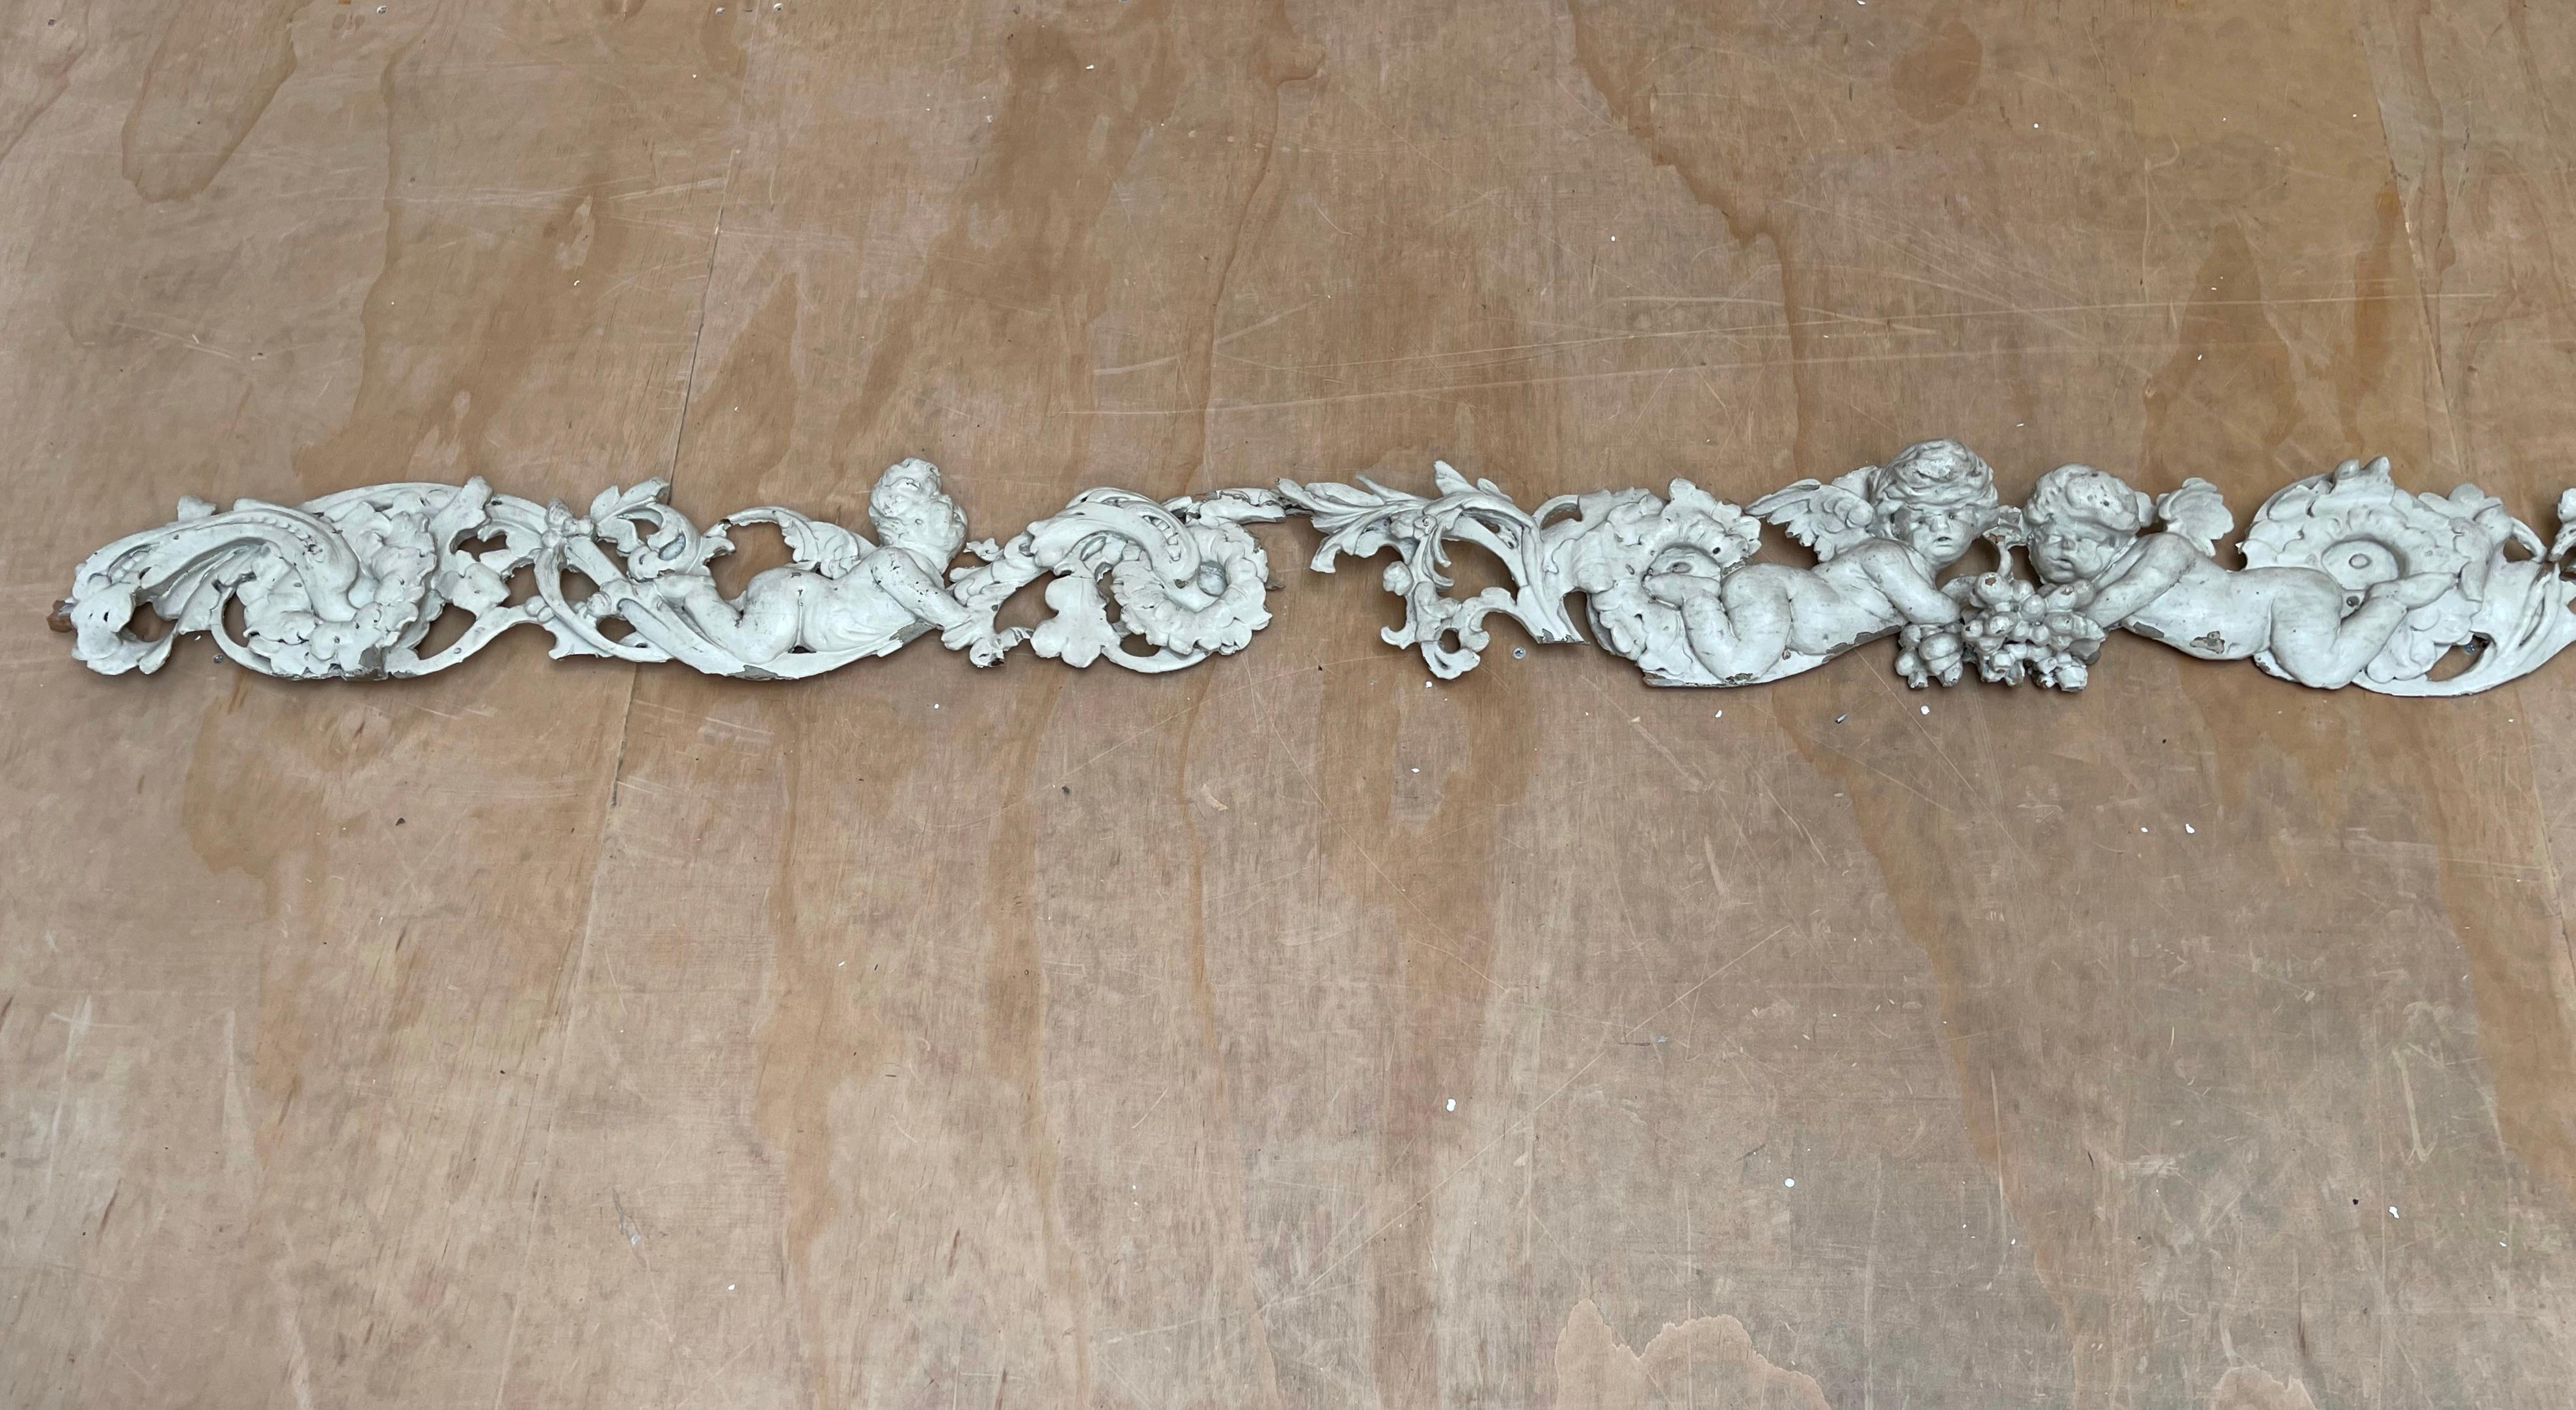 Rare Hand Carved Baroque Architectural Wall or Ceiling Cherubs Sculptures 9 Feet For Sale 5